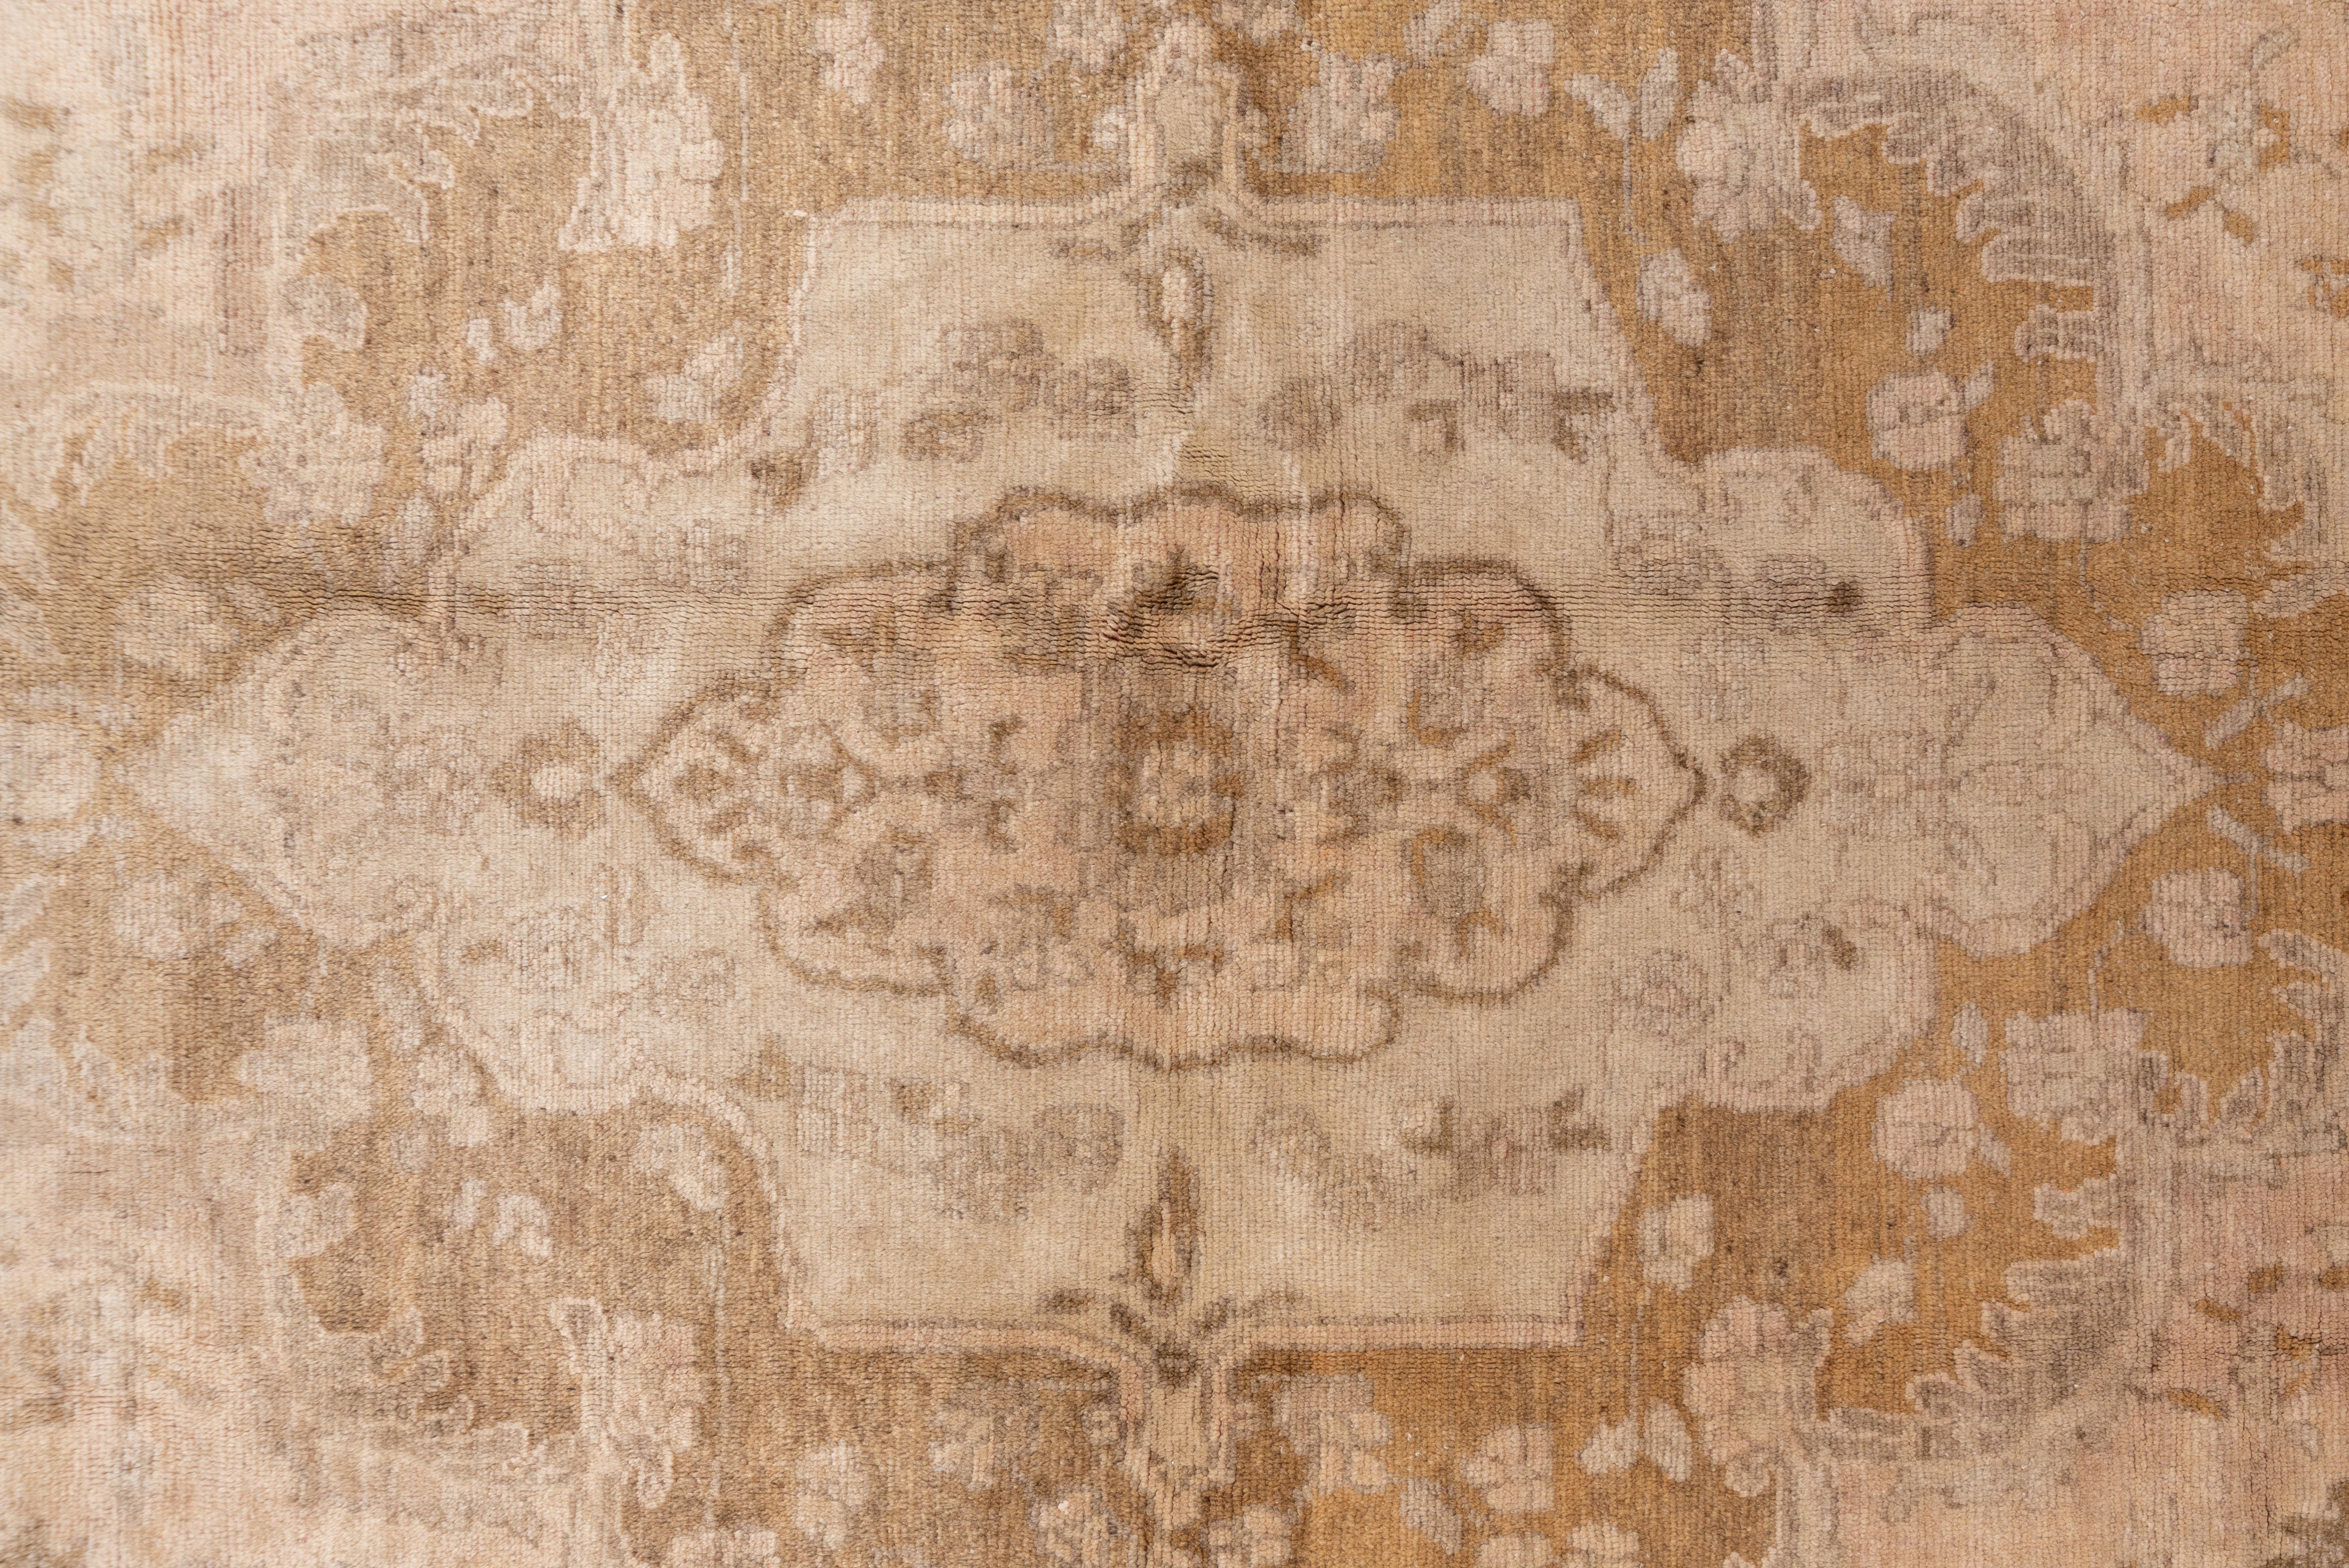 Antique Neutral Turkish Oushak Rug, Circa 1930s In Good Condition For Sale In New York, NY